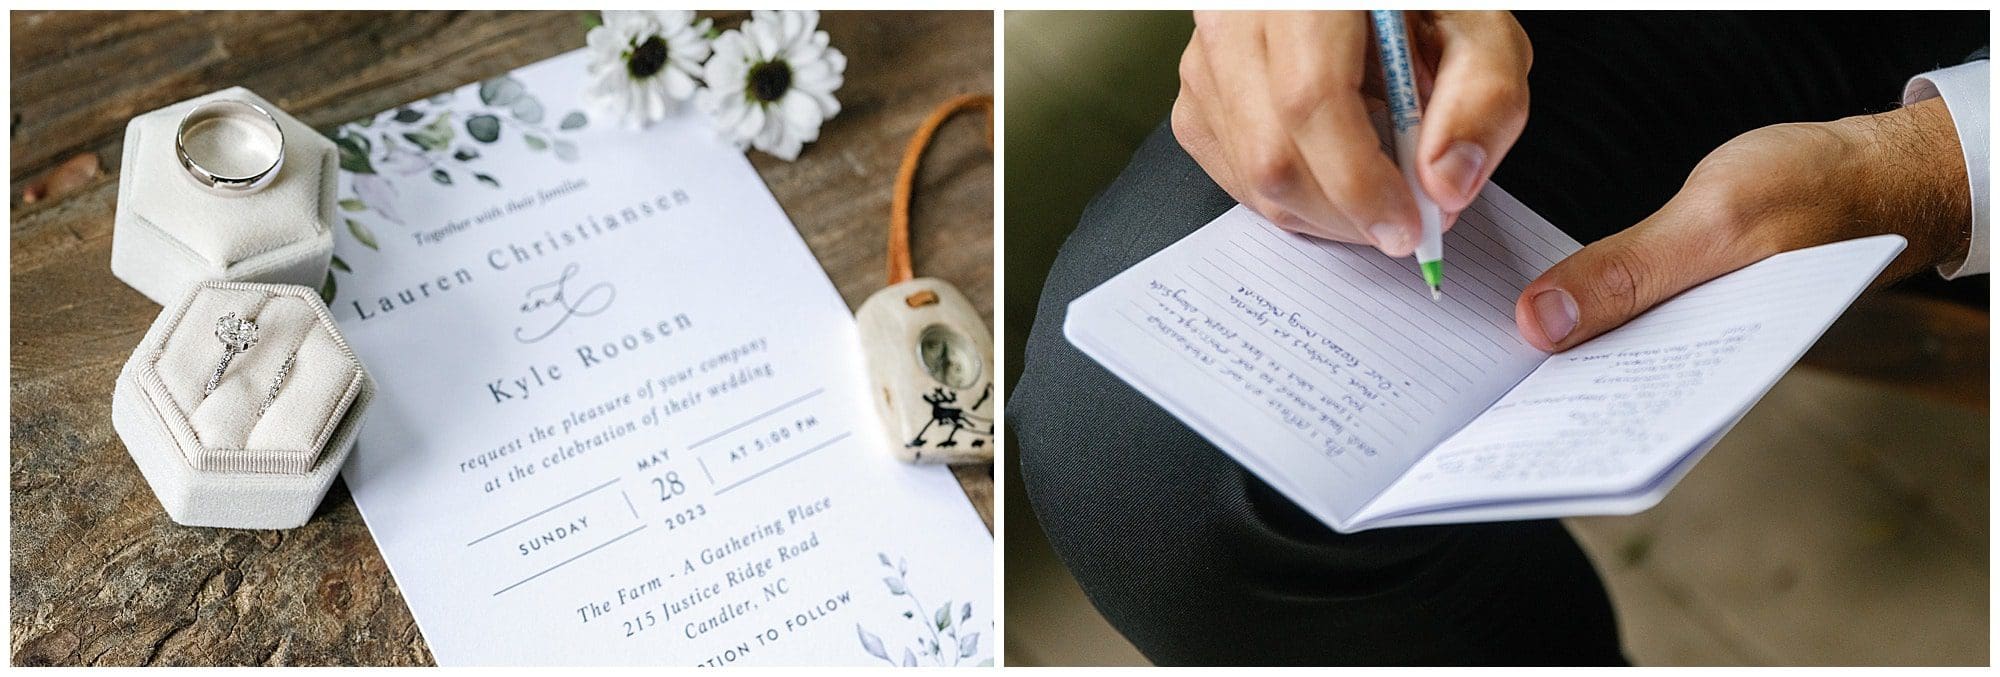 photos of personal vows , invitation and rings